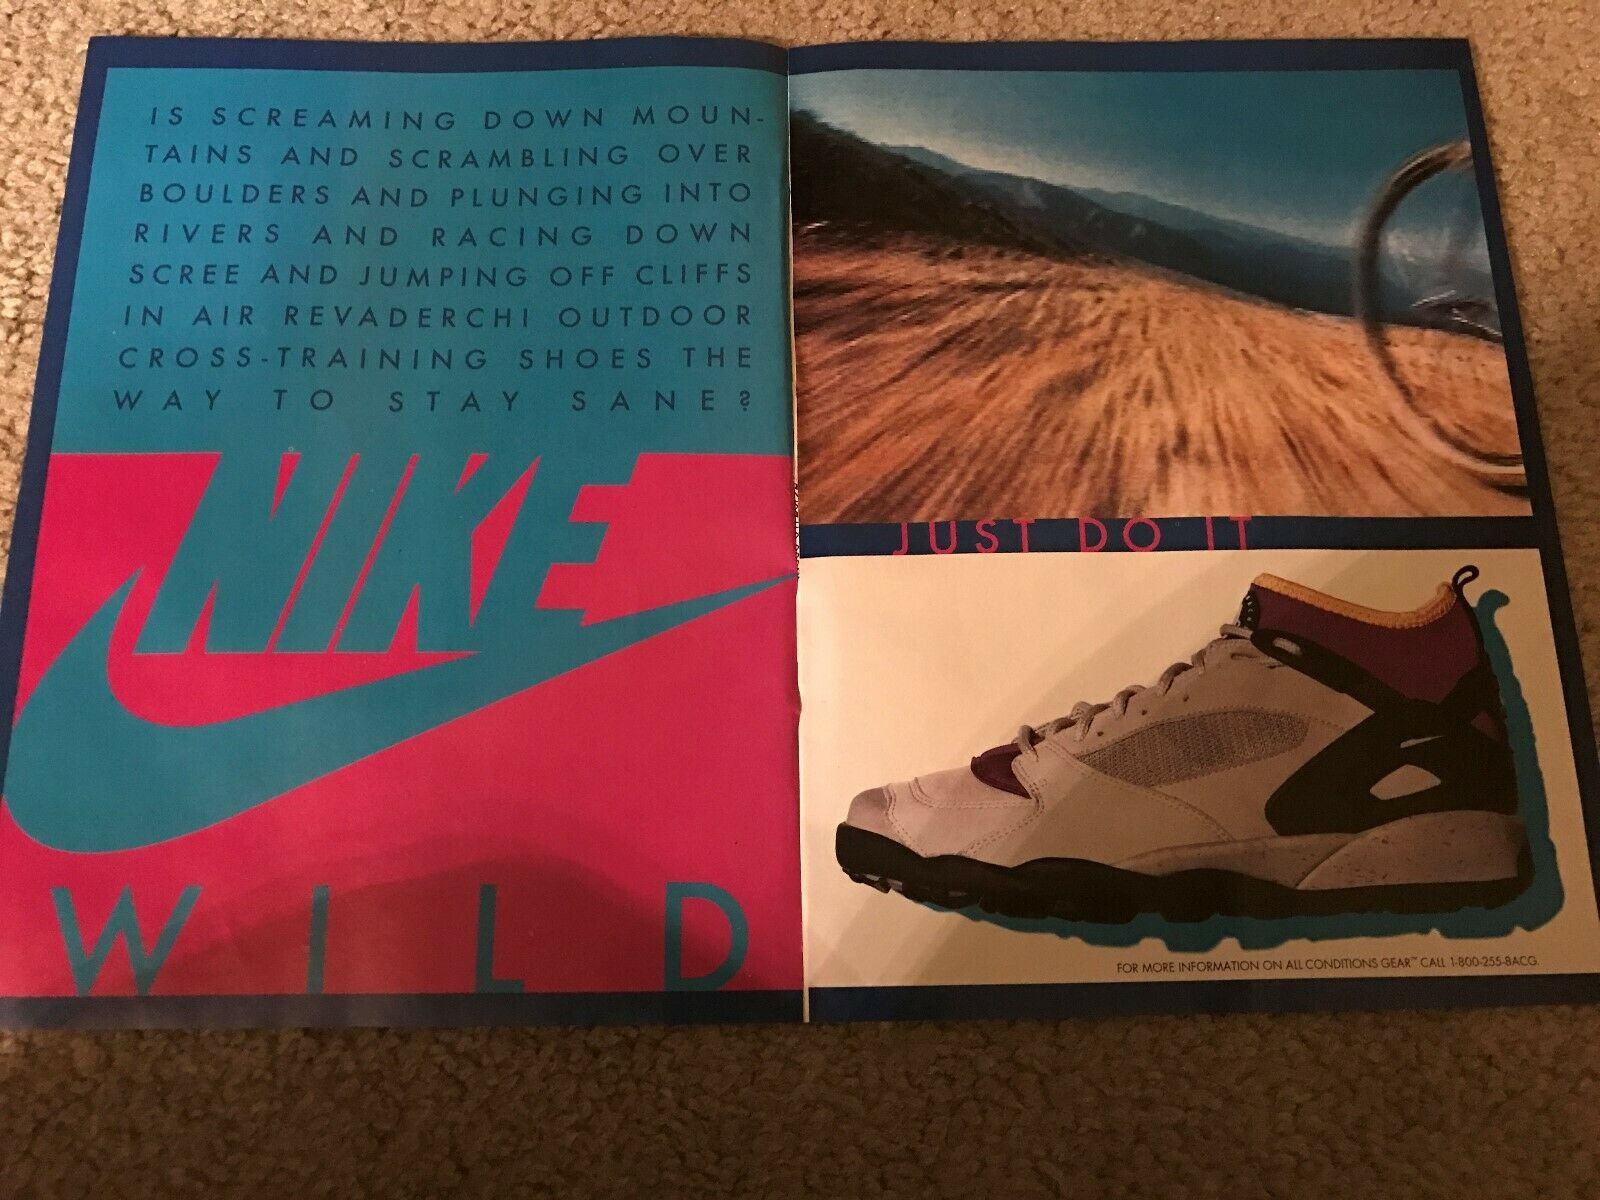 Vintage 1992 NIKE AIR REVADERCHI HUARACHE Cross-Trainer Shoes Poster Print Ad